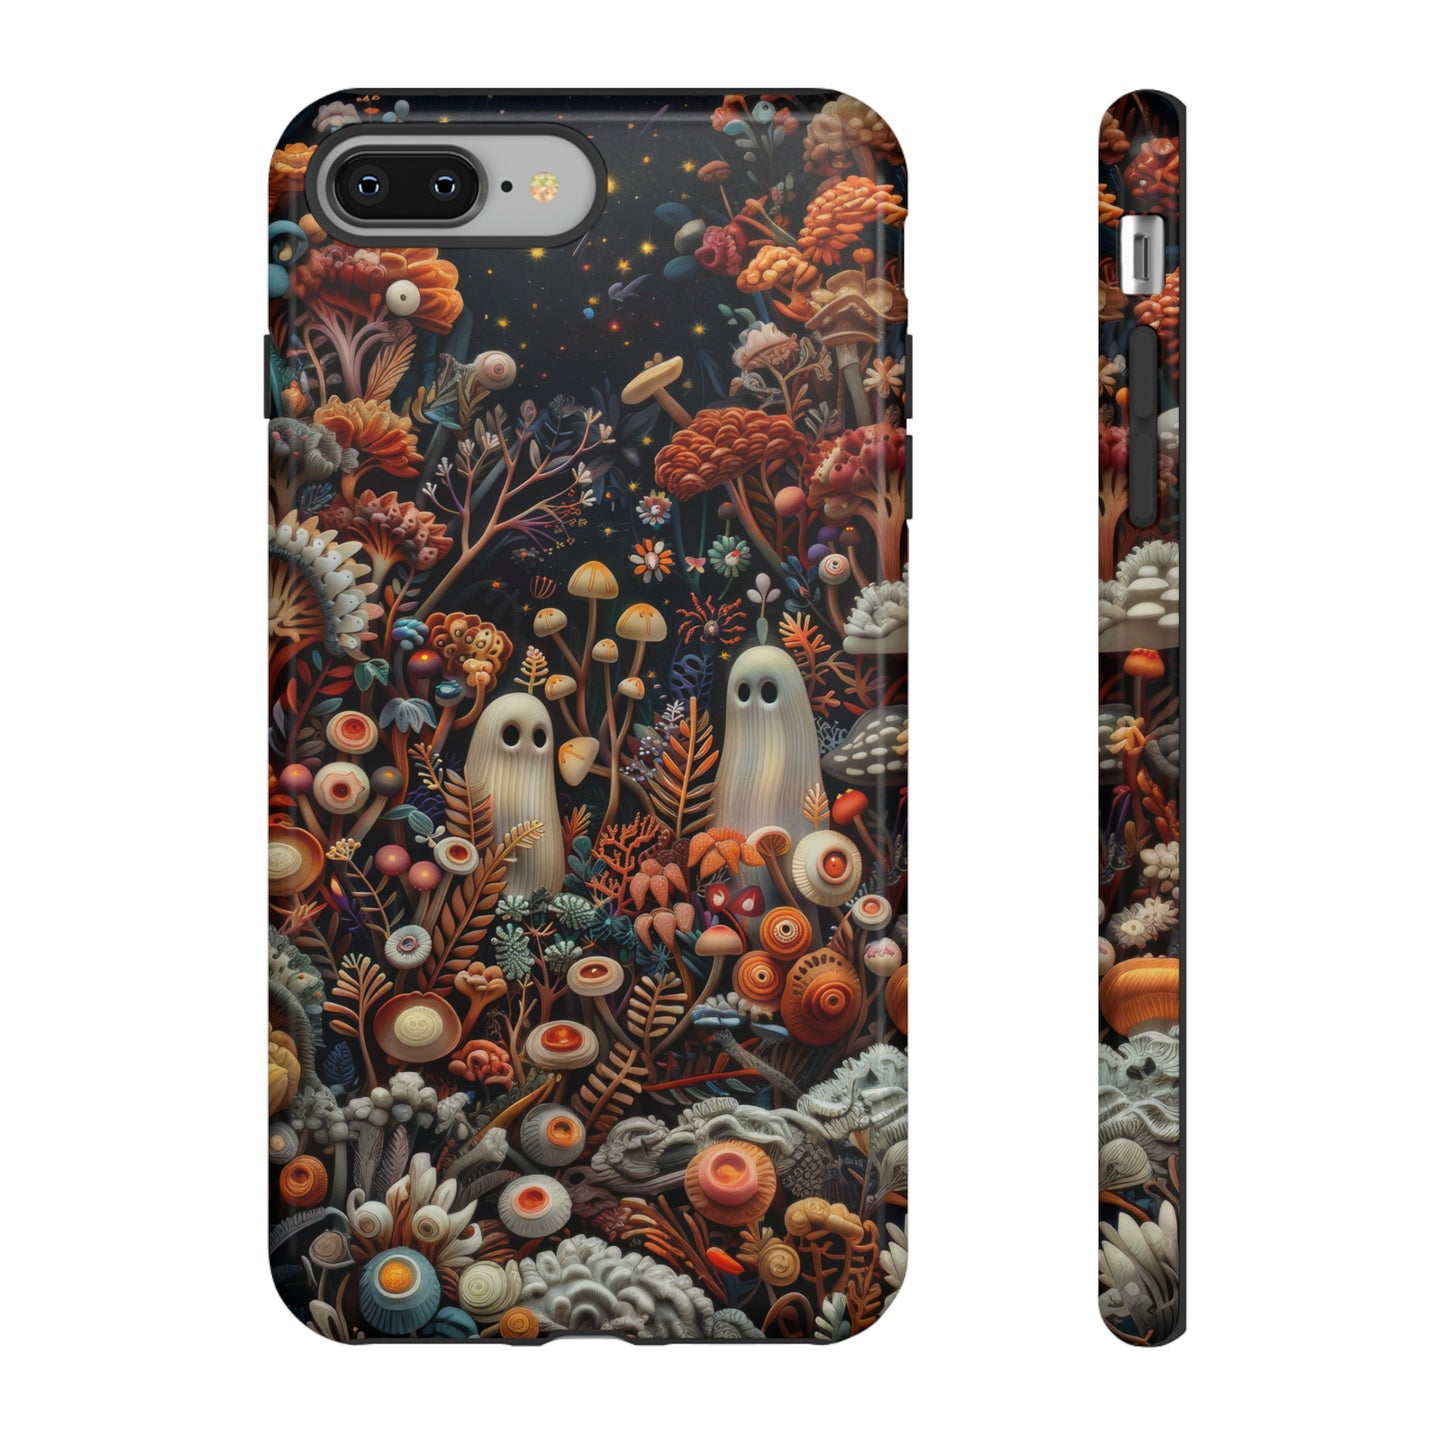 Cosmic Fantasy iPhone Case, Space-Themed Mushroom Design, Protective Cover with Galactic Charm, Tough Phone Cases